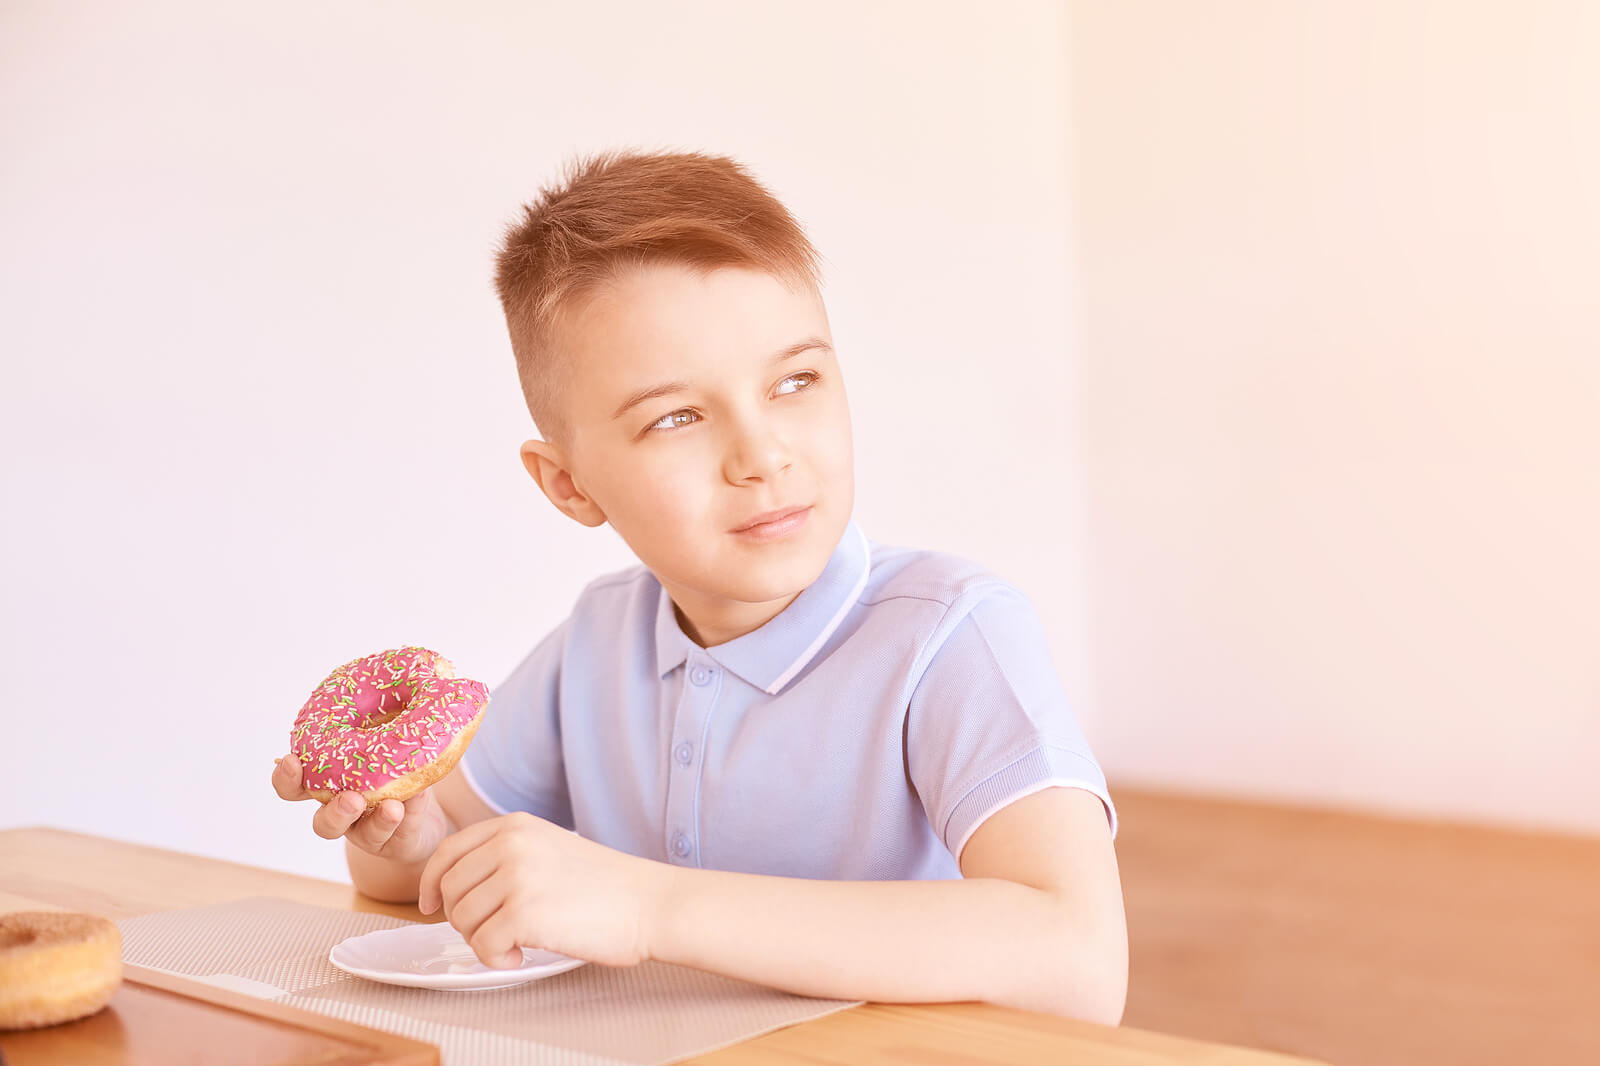 A young boy eating a donut.